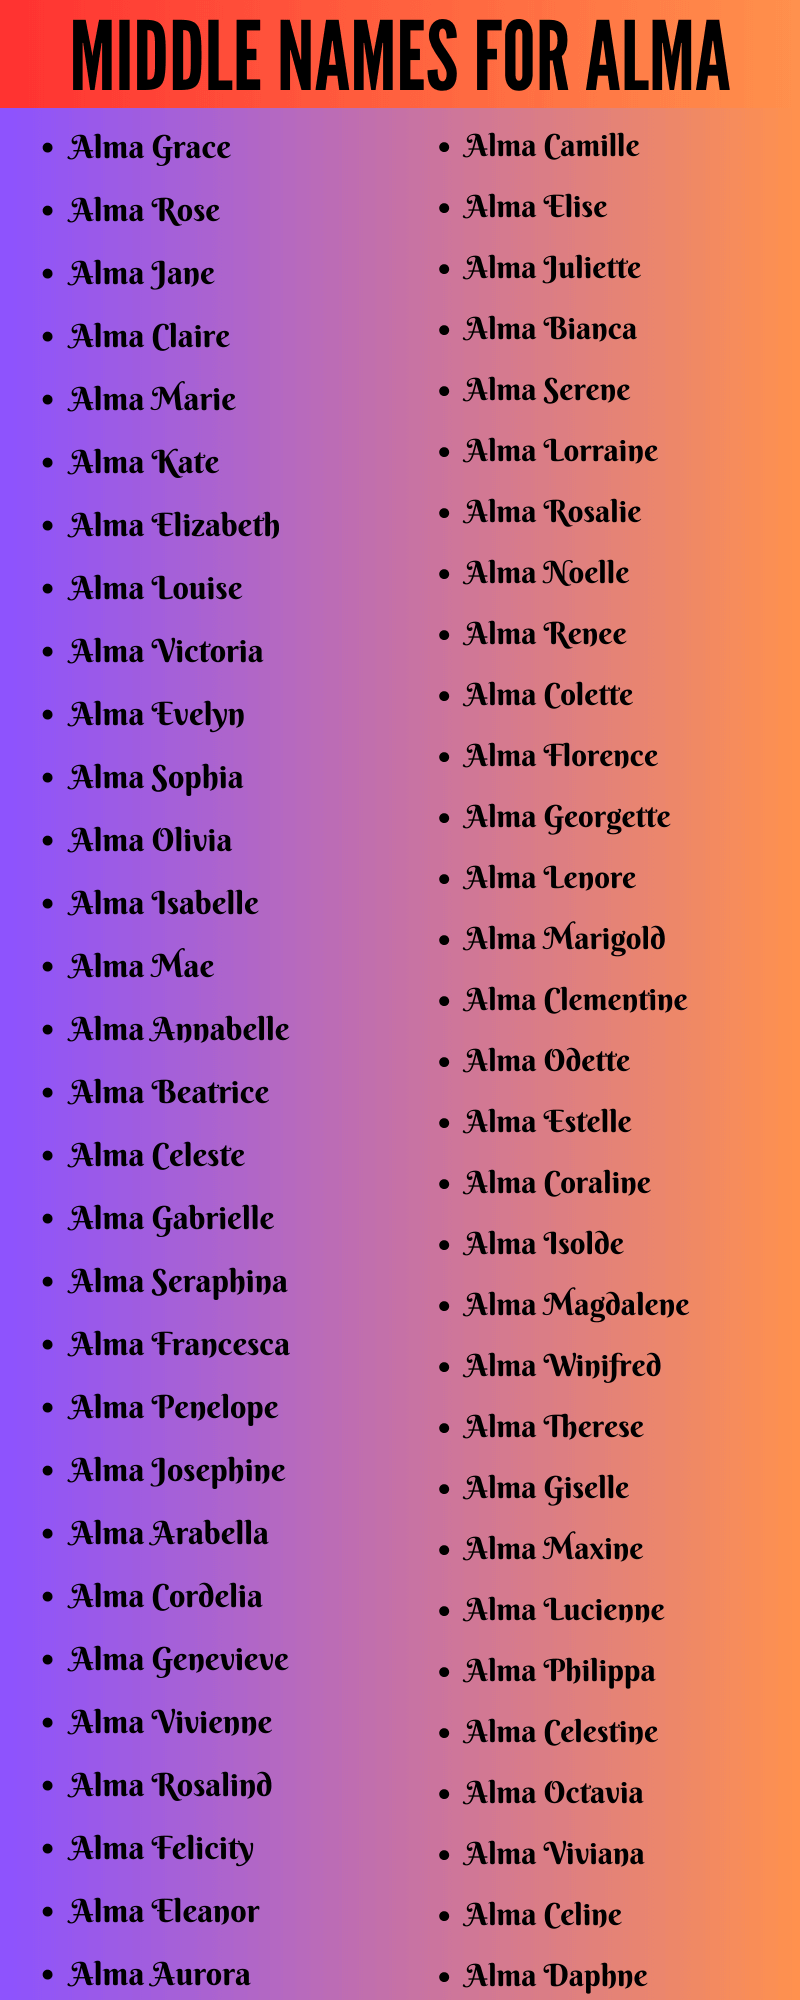 400 Cute Middle Names For Alma